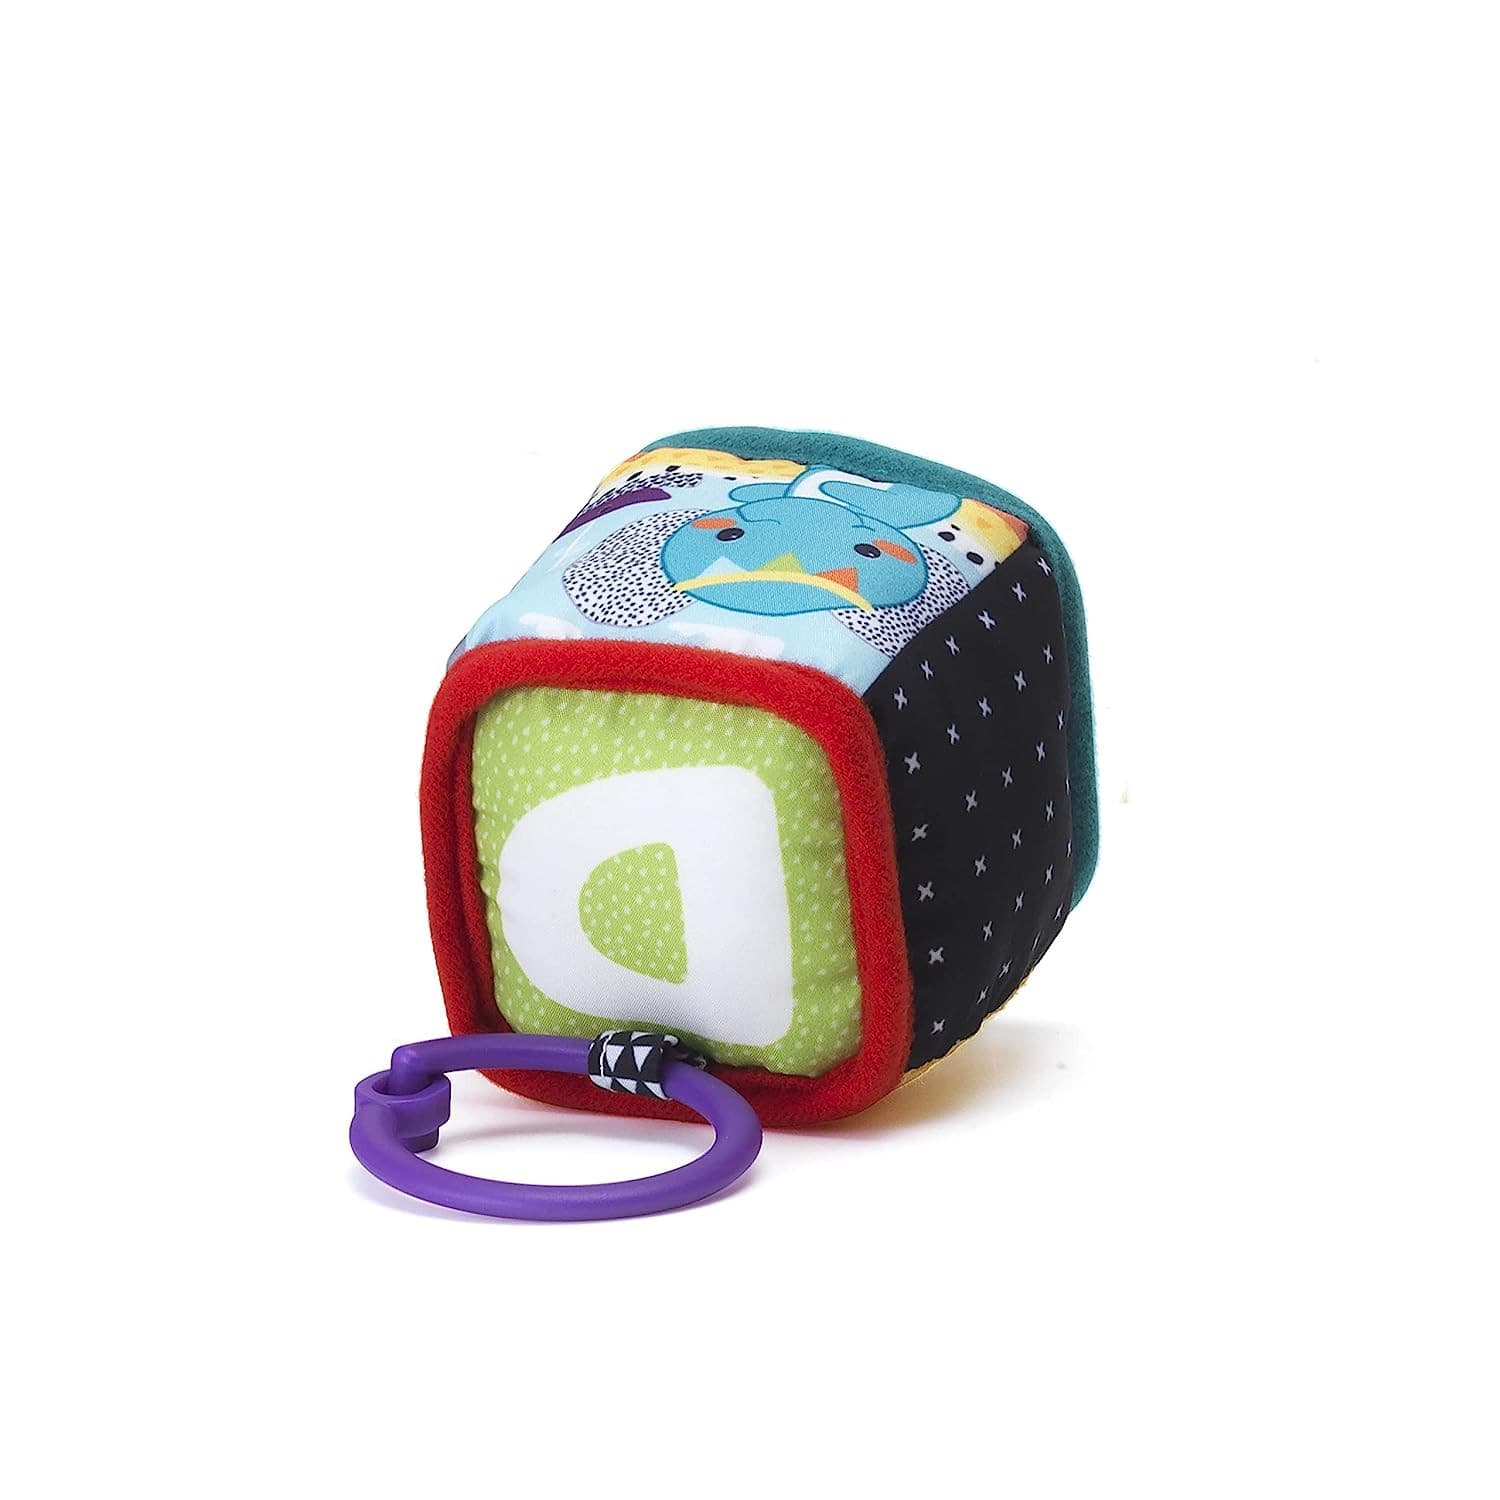 Infantino Discover and Play Soft Blocks Development Toy.